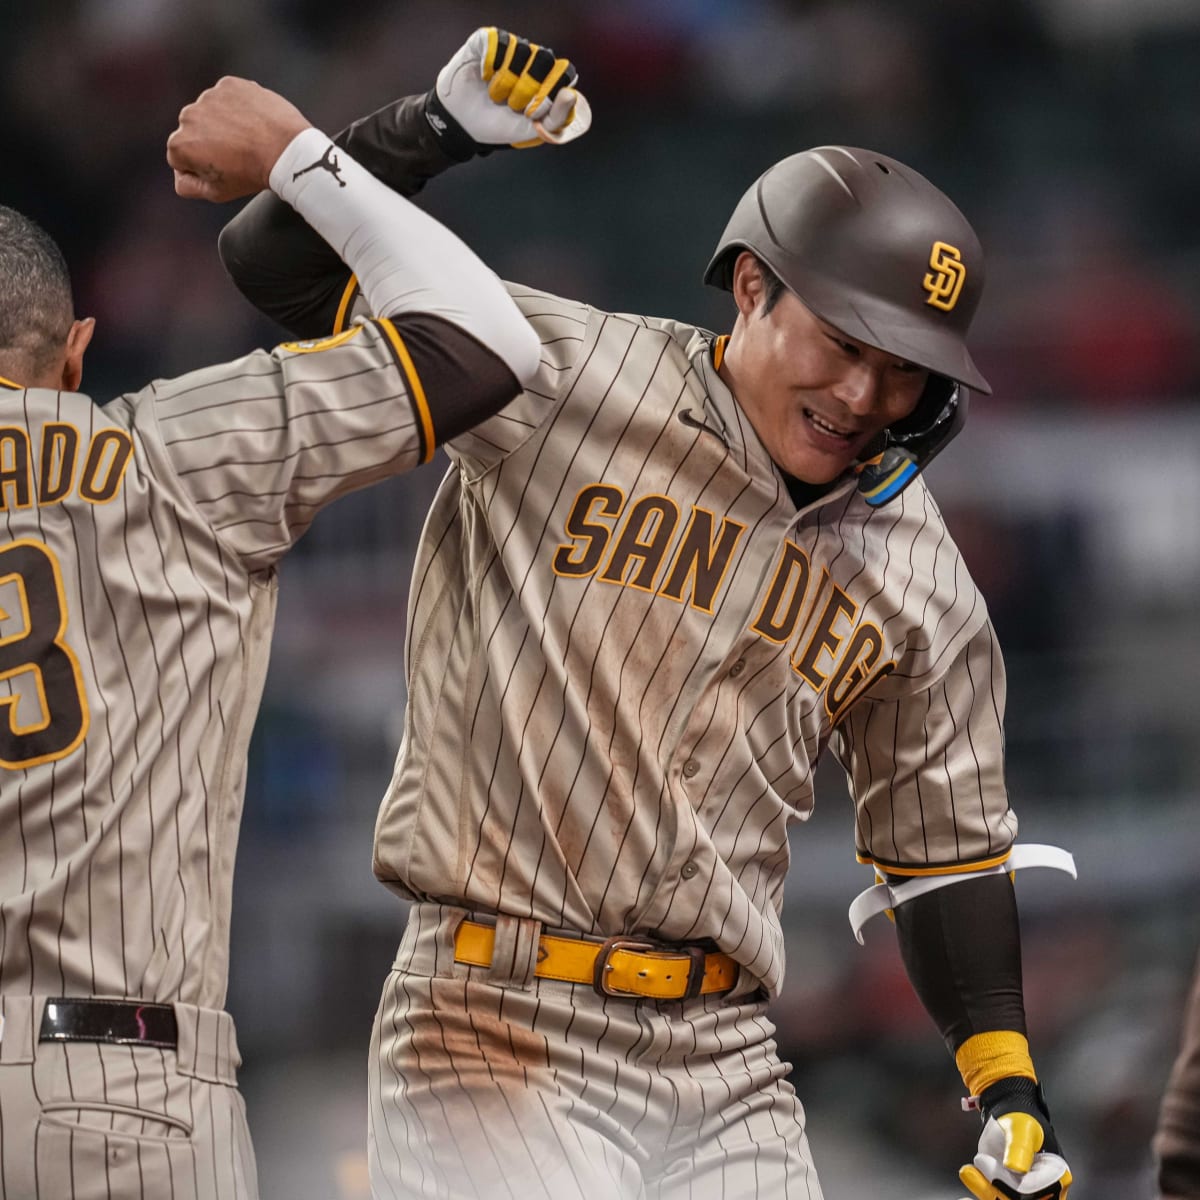 Padres News: Newest Power Rankings Place Friars Just Behind 1st Place -  Sports Illustrated Inside The Padres News, Analysis and More